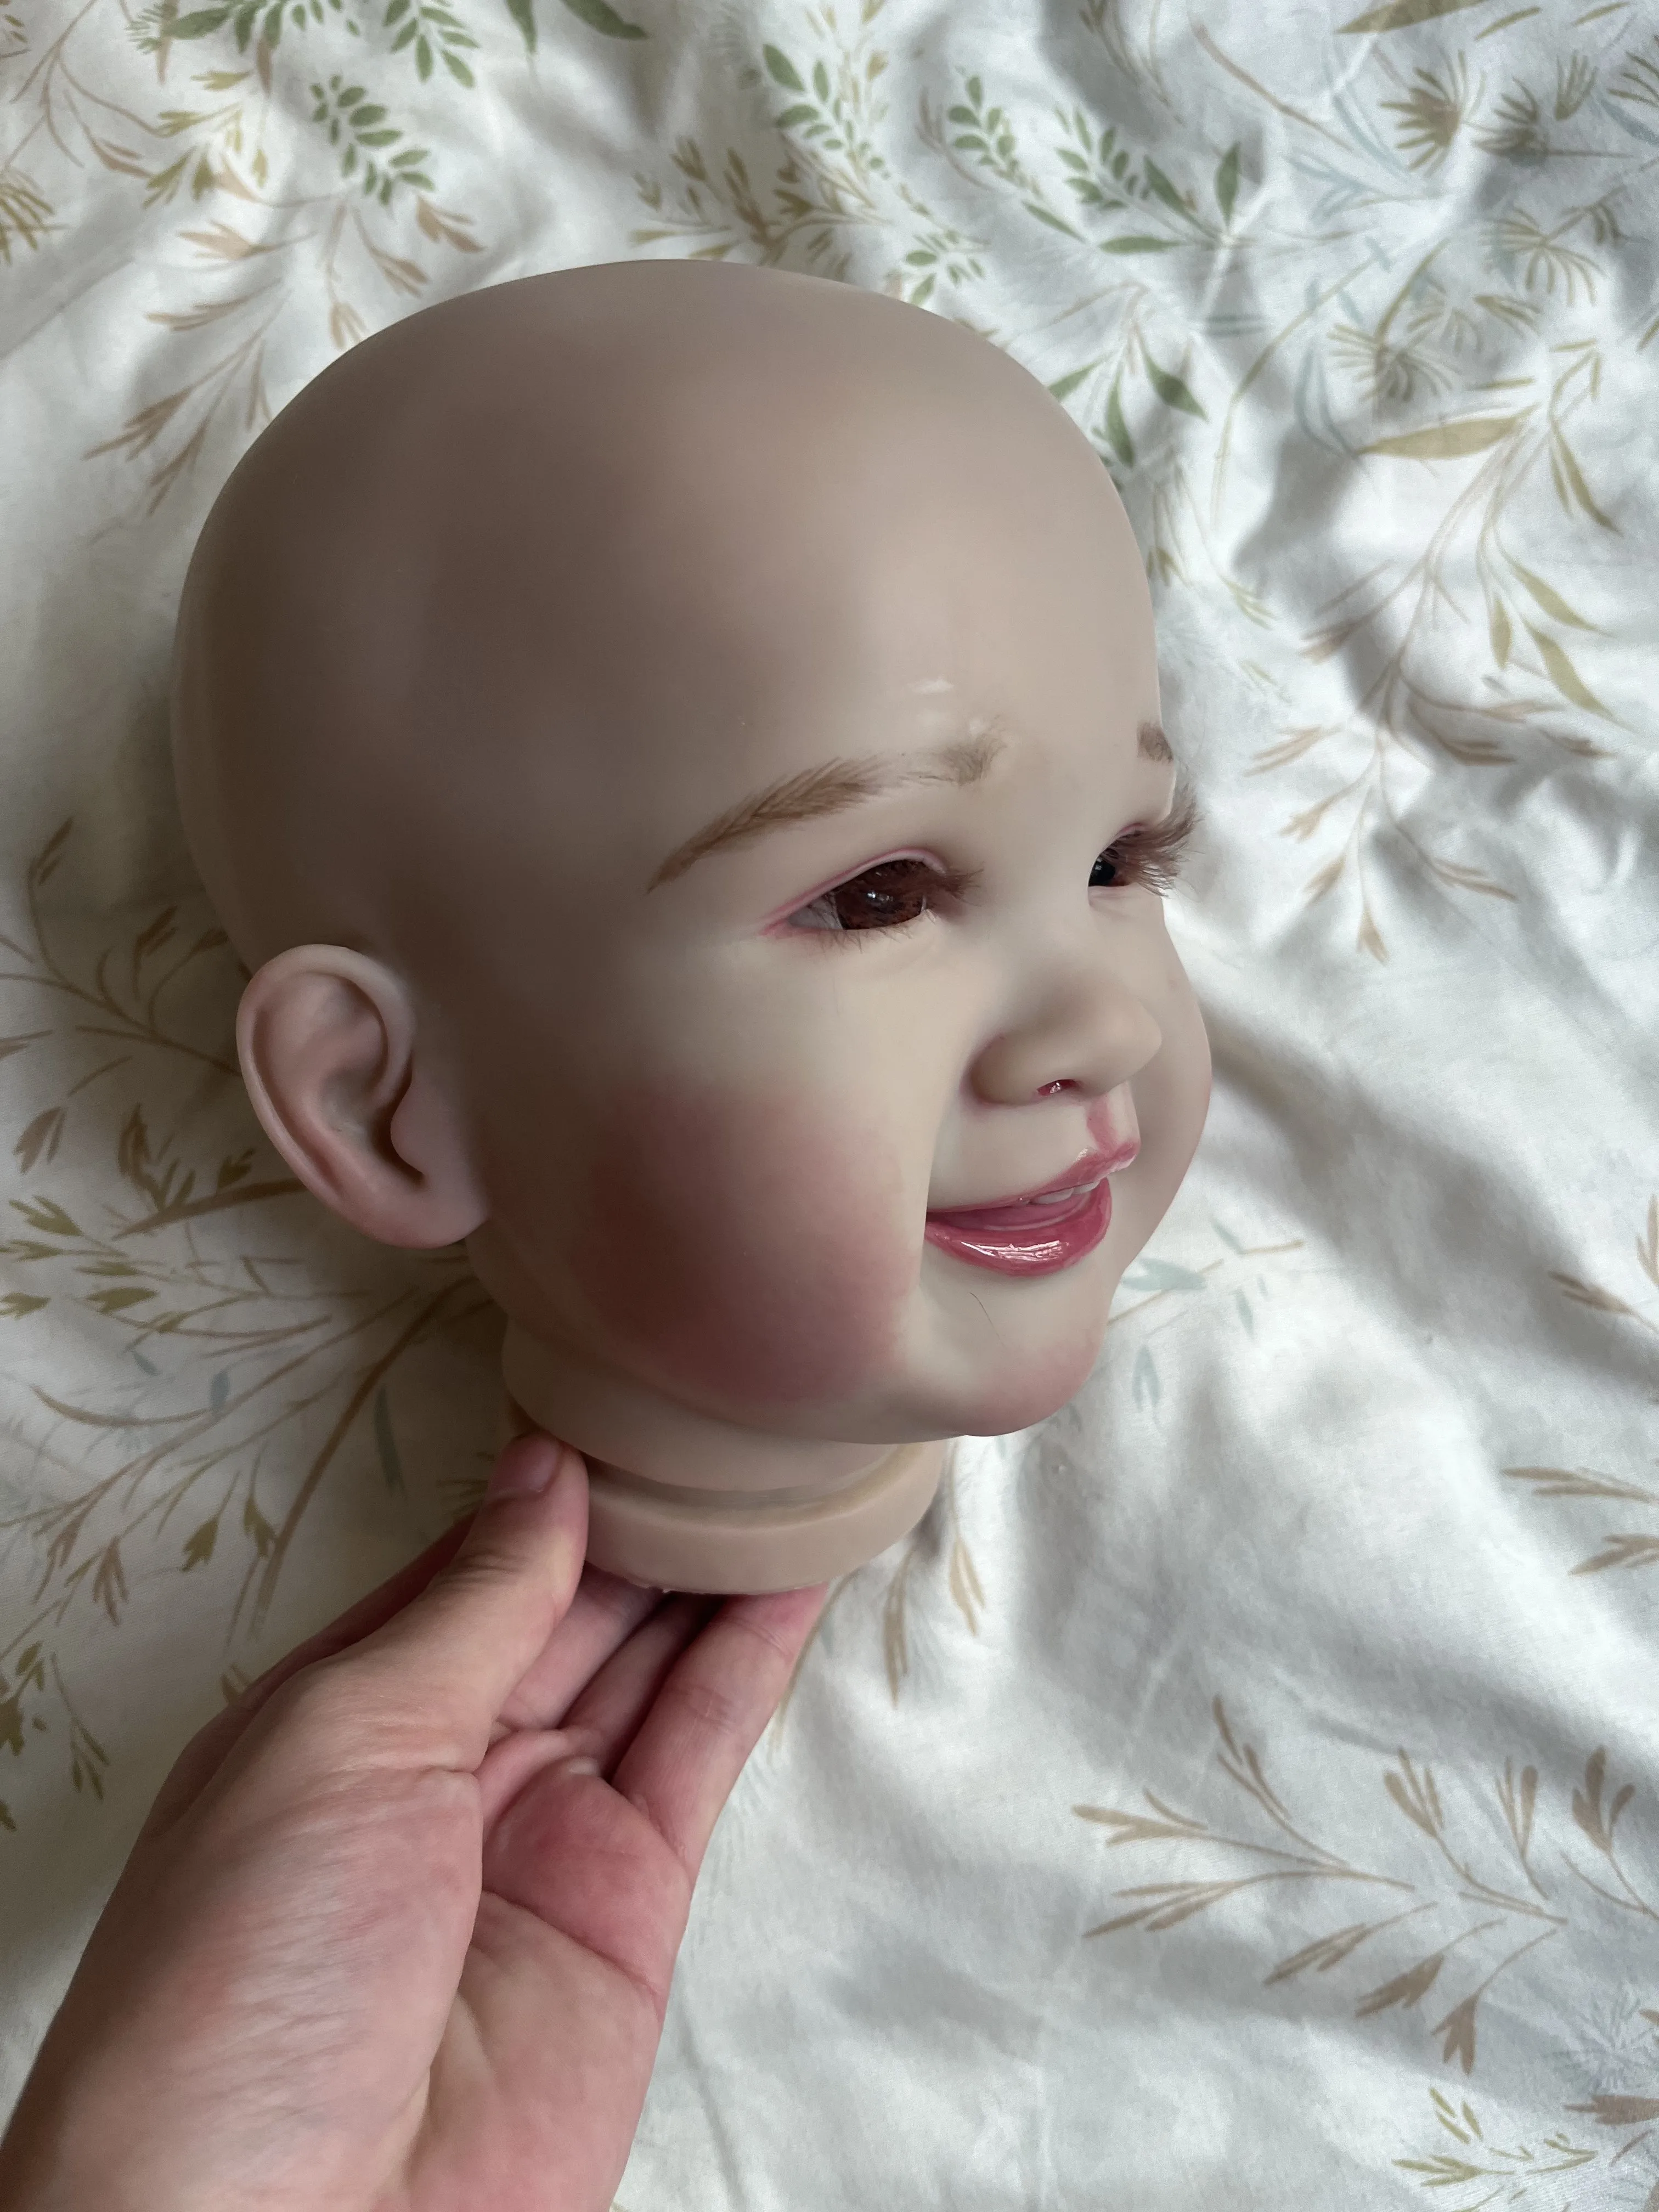 

Artist Luo Made 28inch Reborn Baby Doll Renata Genesis Painting Painted Kit DIY Part With Cloth Body